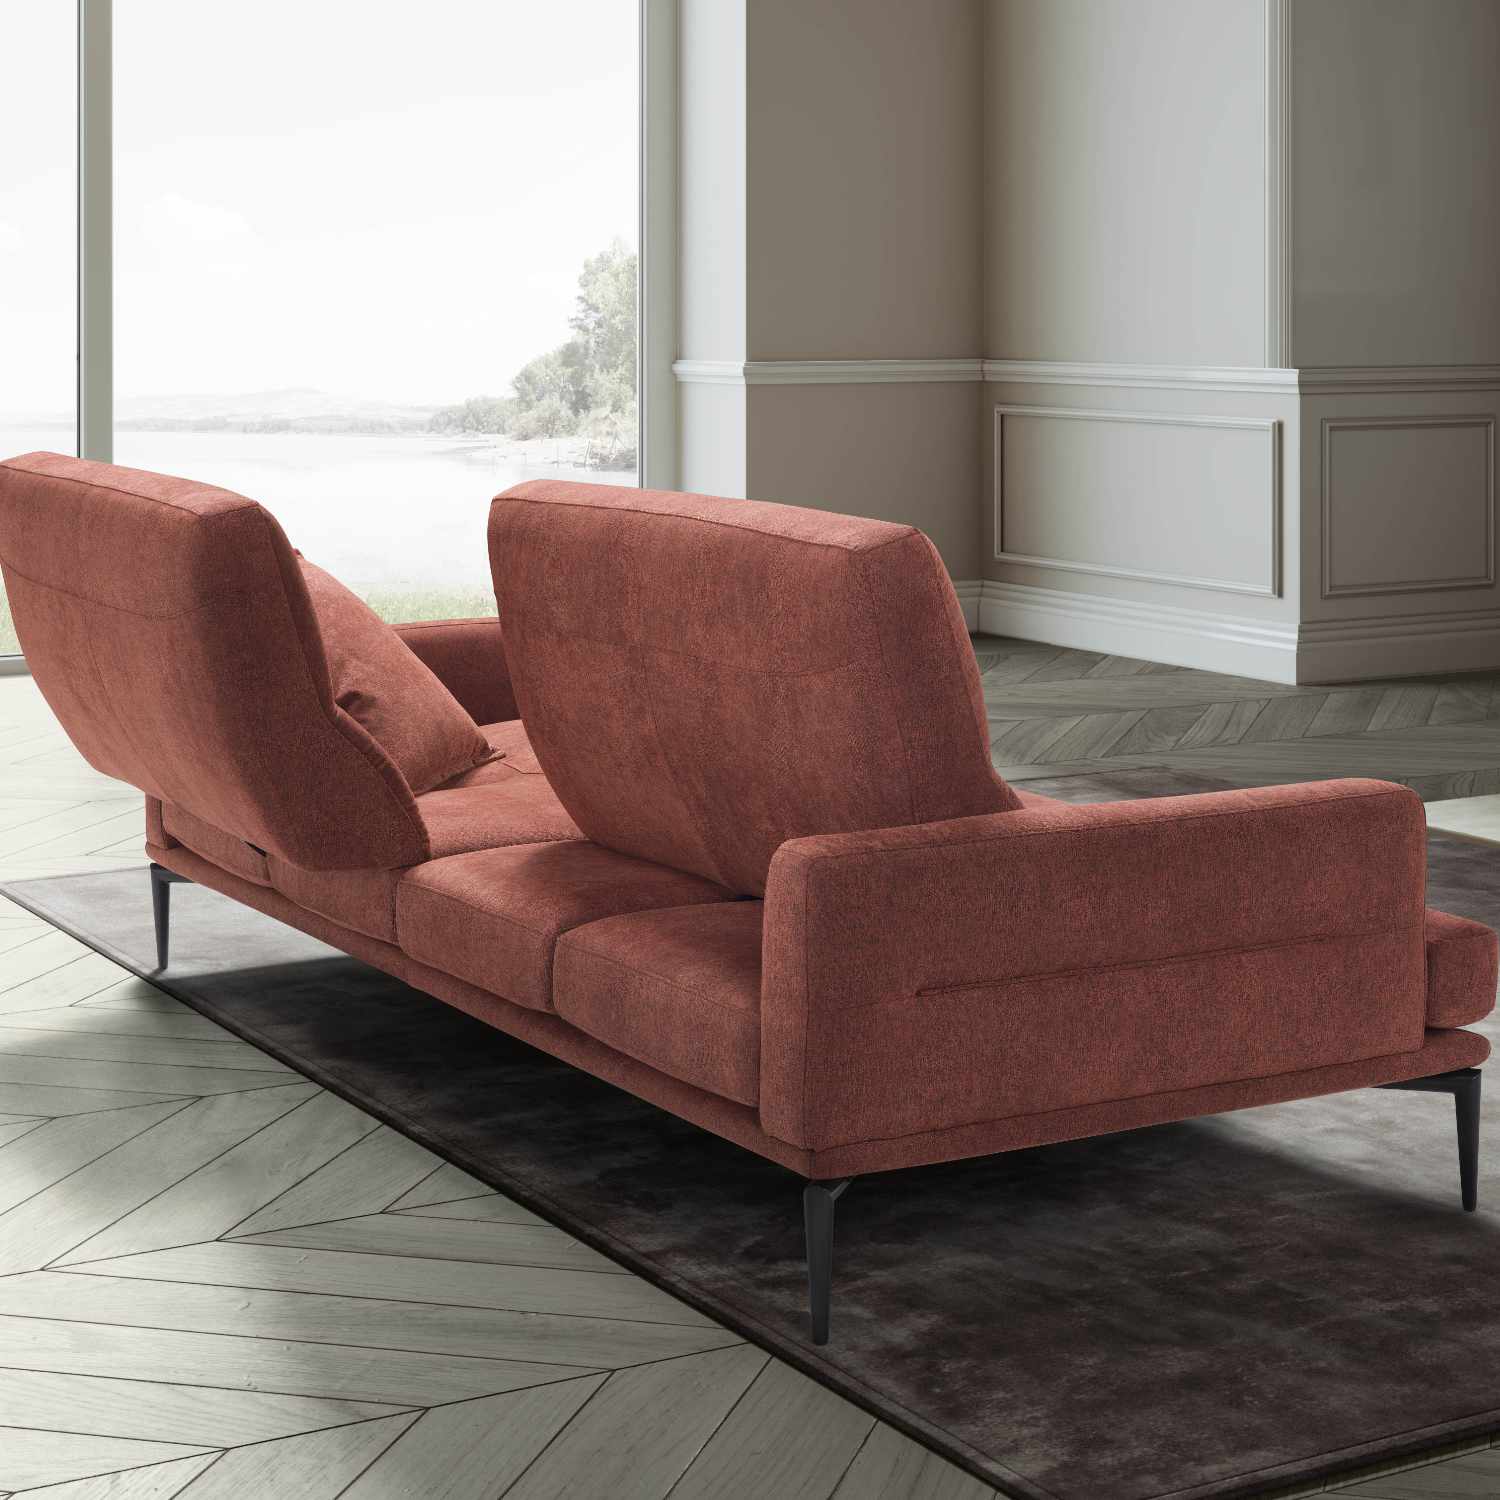 The Feng luxury made in italy fabric sofa